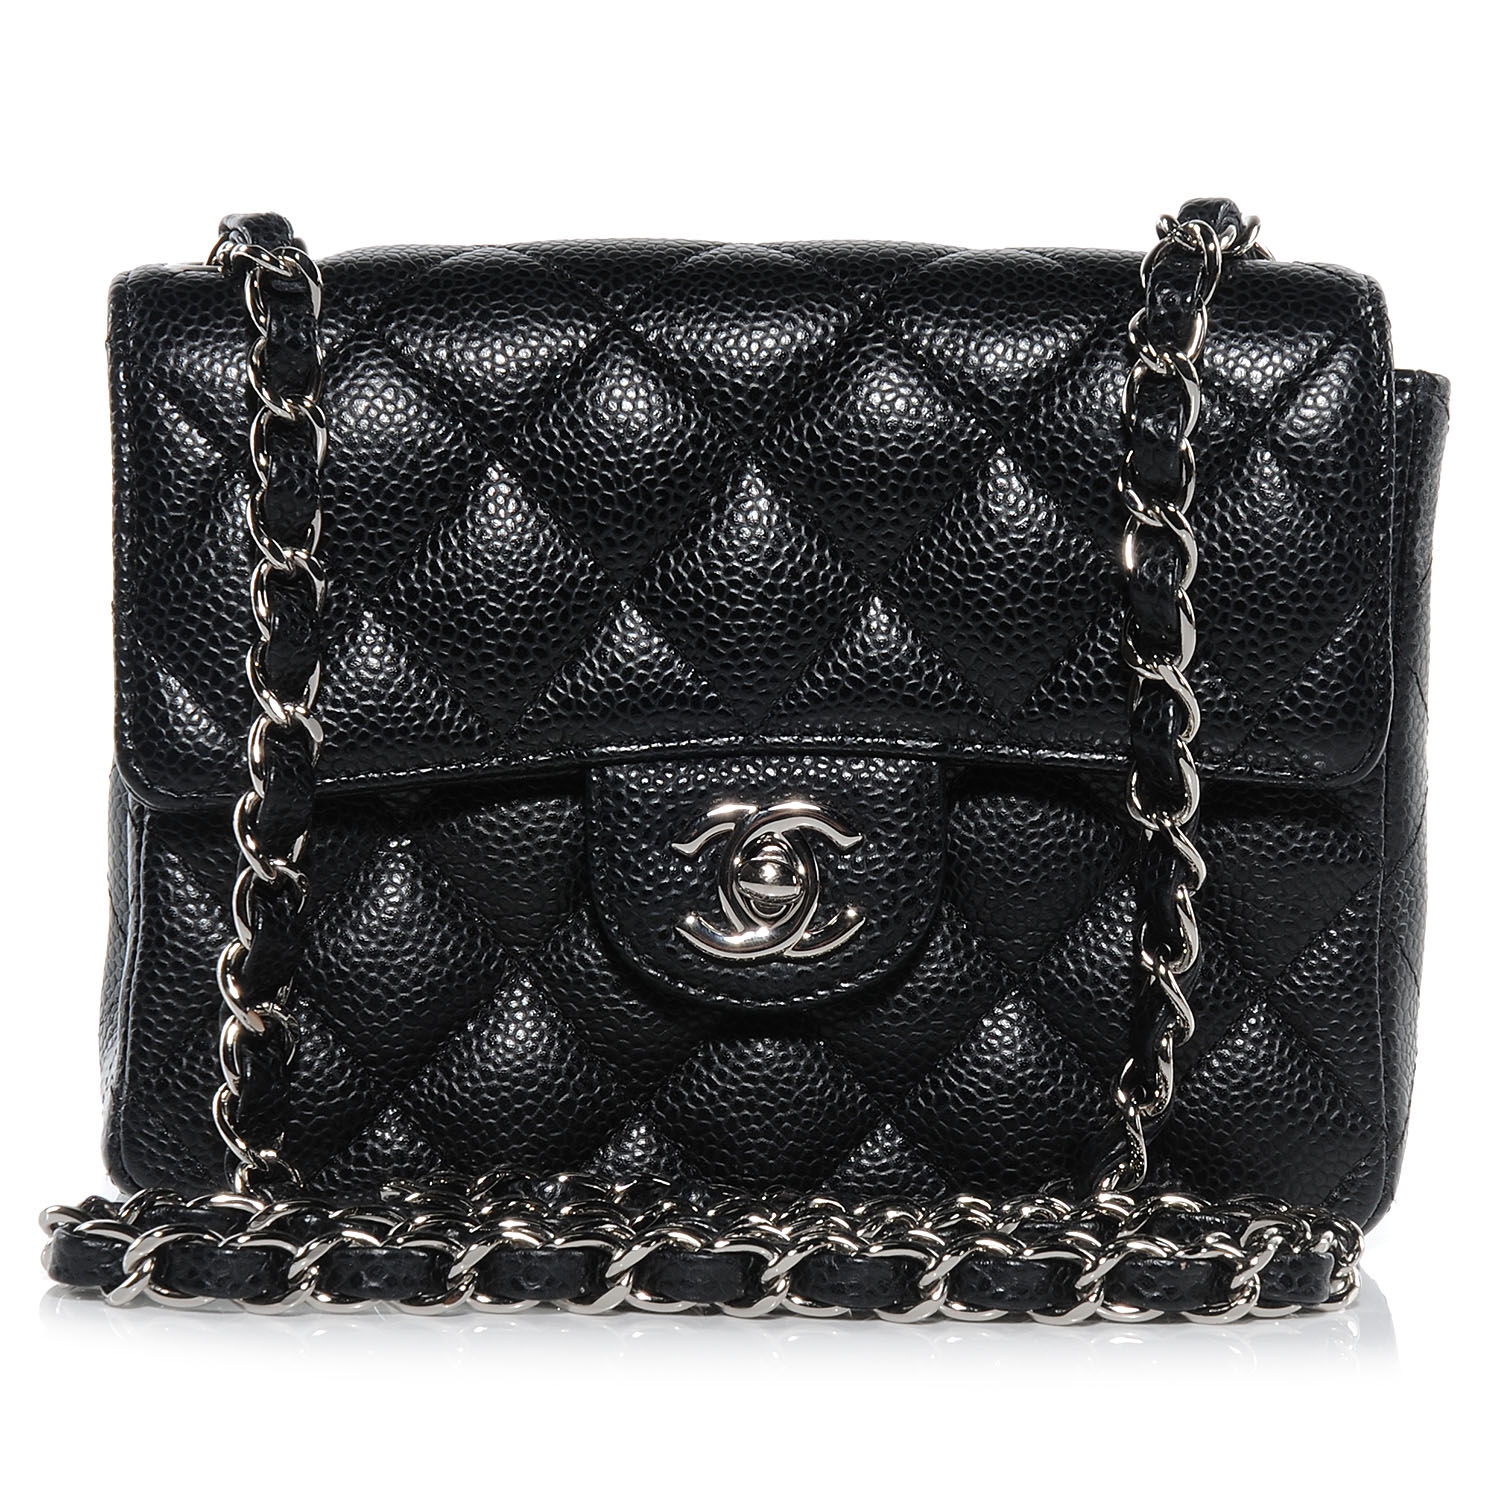 CHANEL Caviar Quilted Mini Flap Bag Black 51945